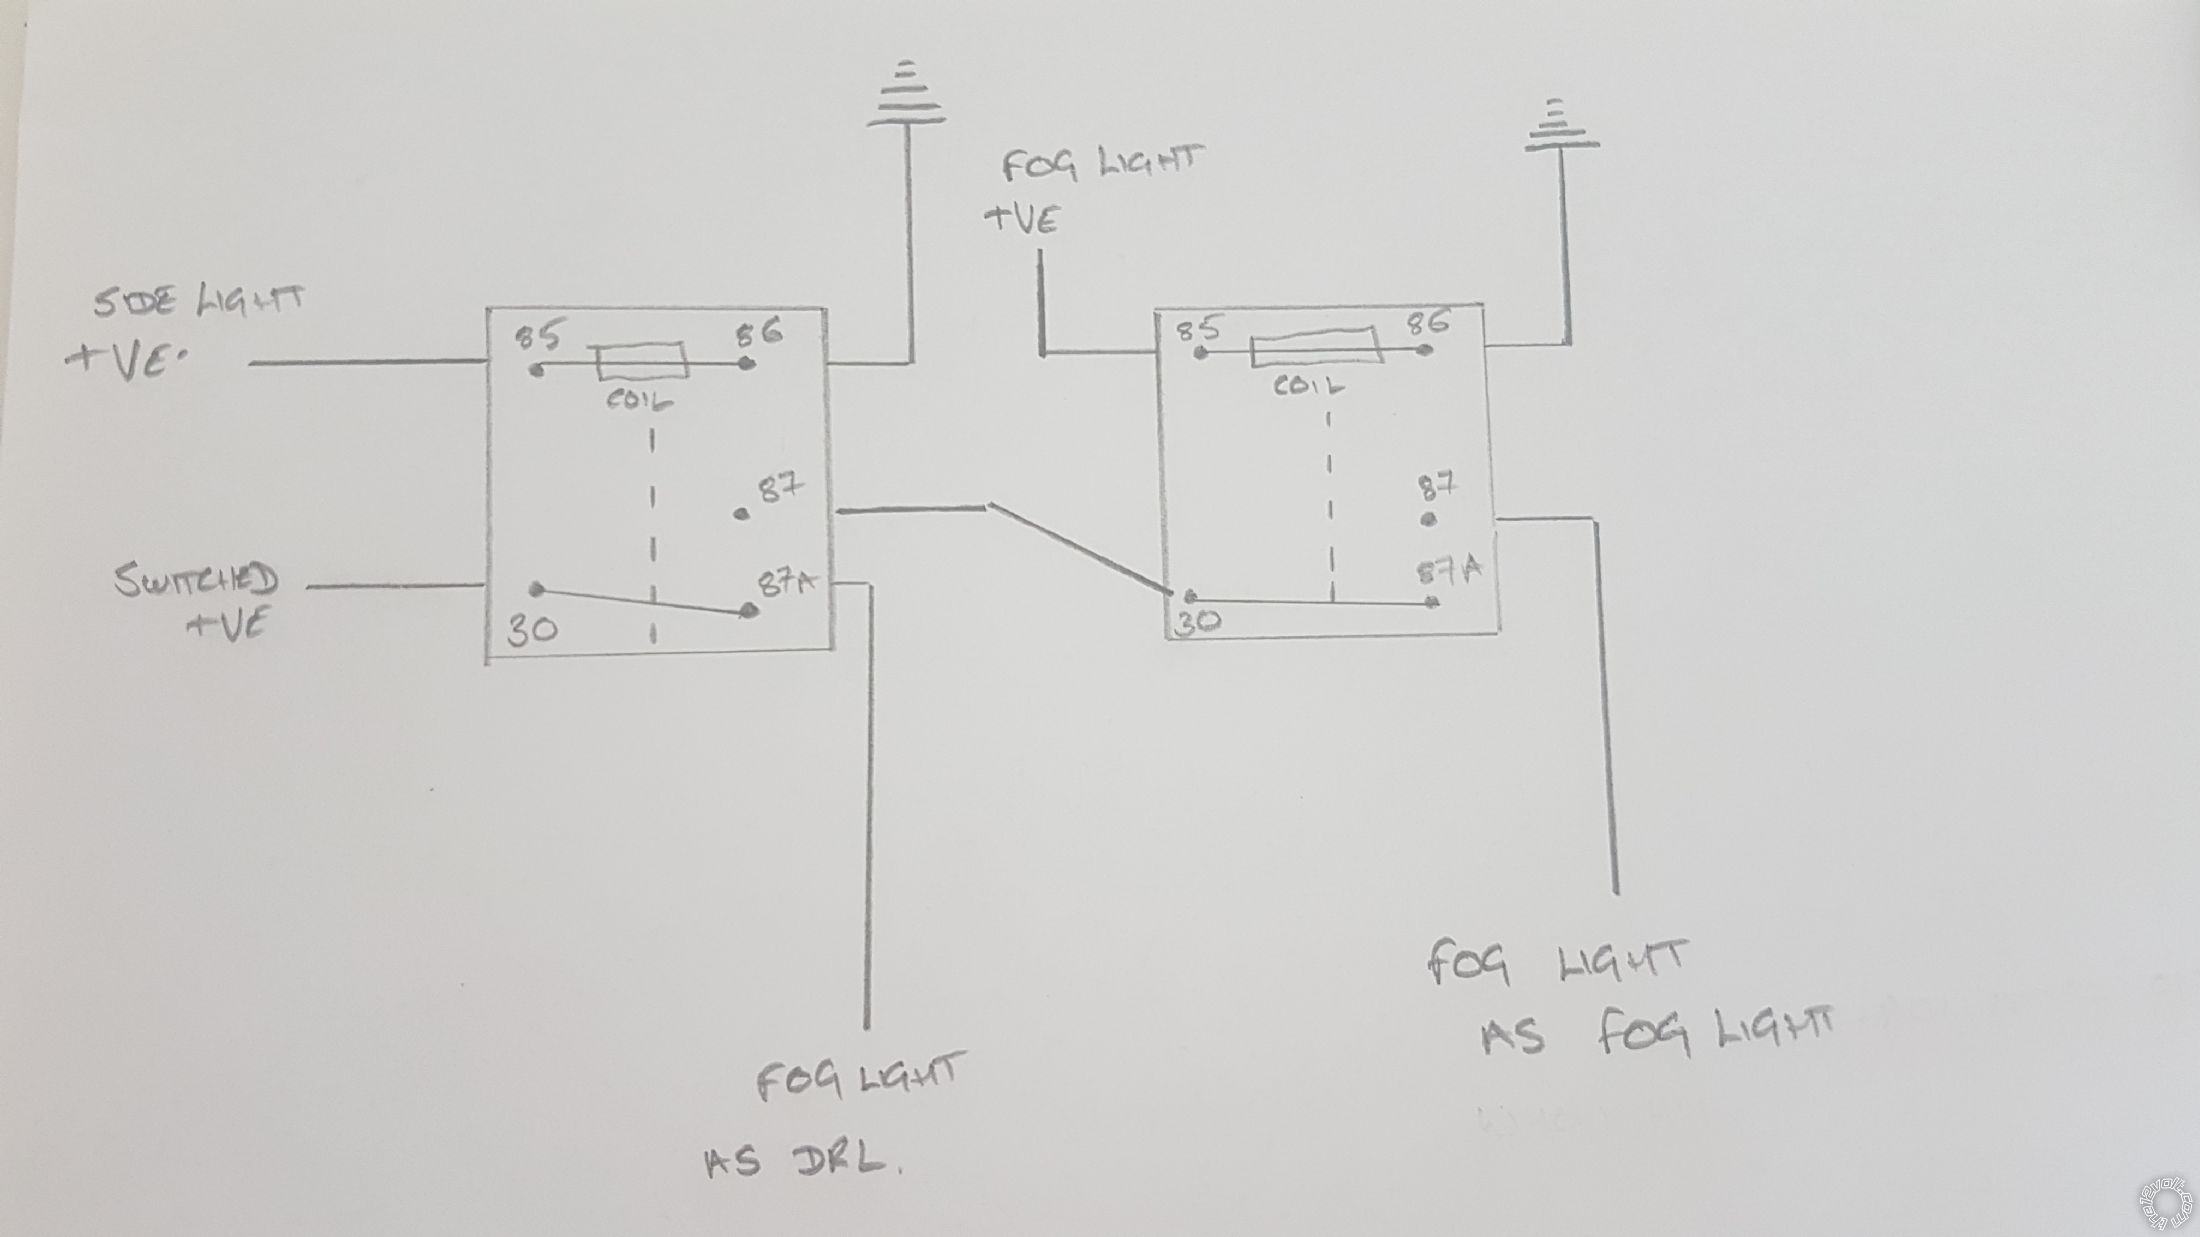 Triple Function Fog Light Relay Wiring - Last Post -- posted image.